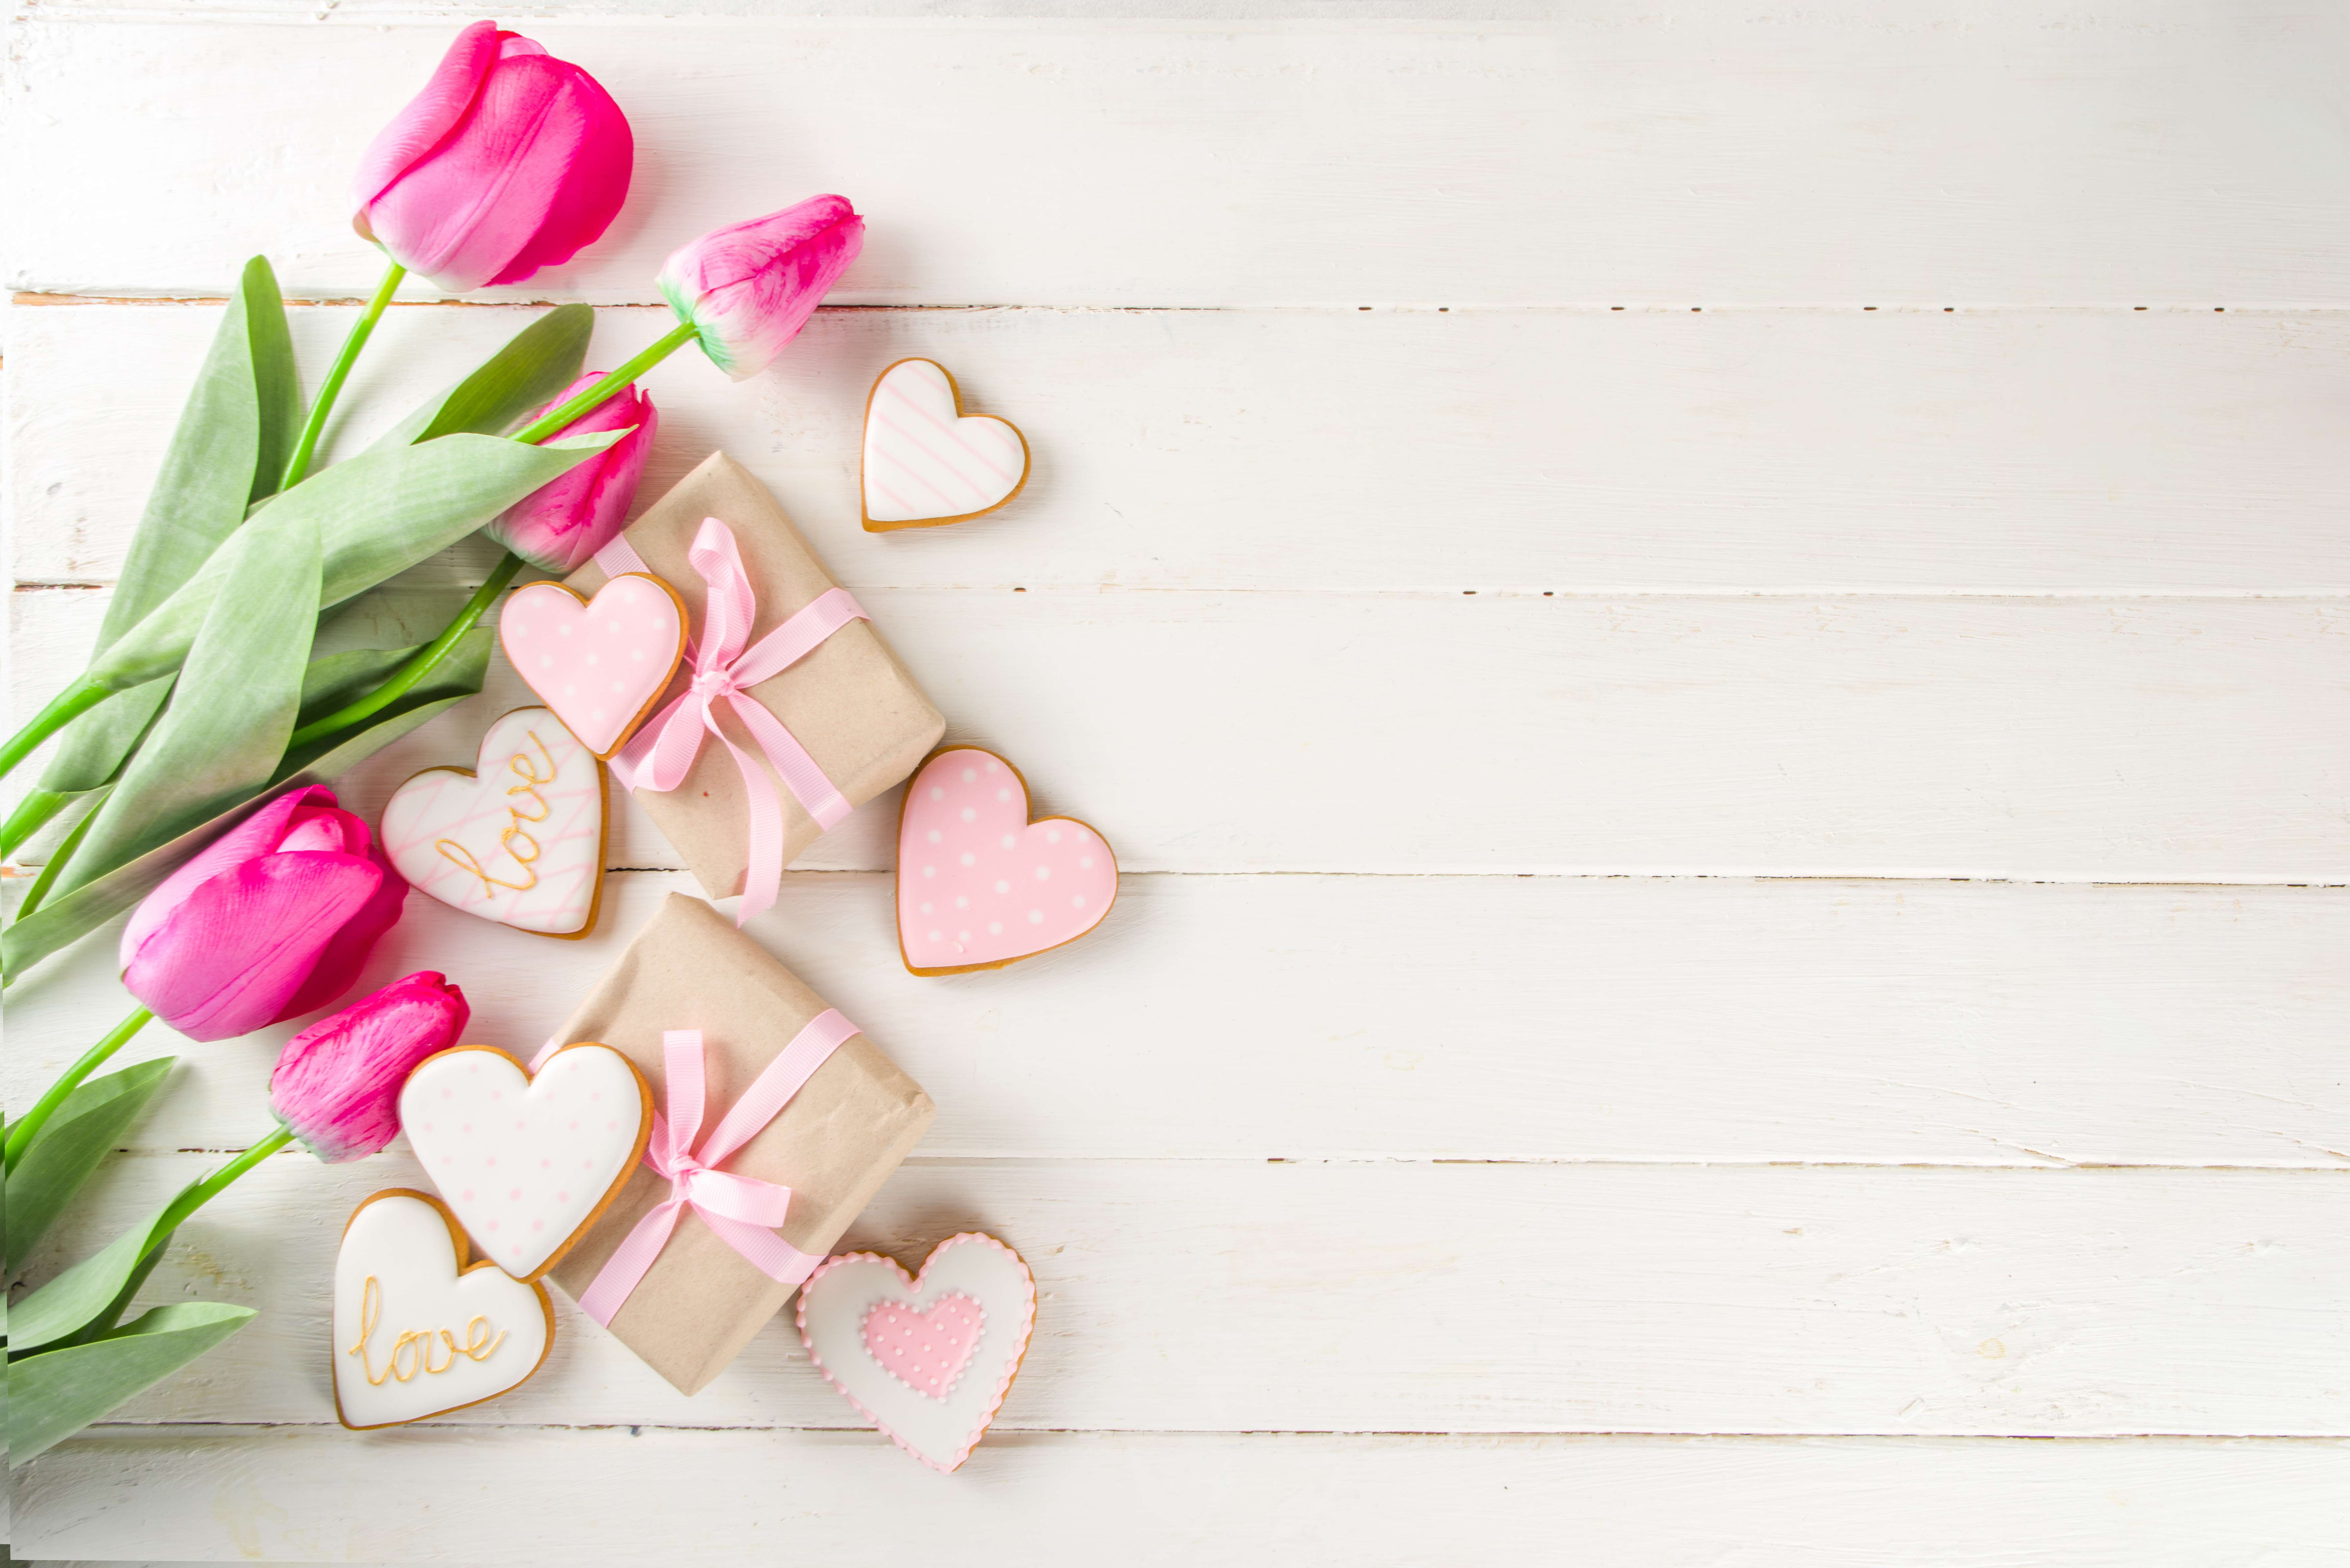 A romantic bouquet of pink tulips and heart-shaped cookies.